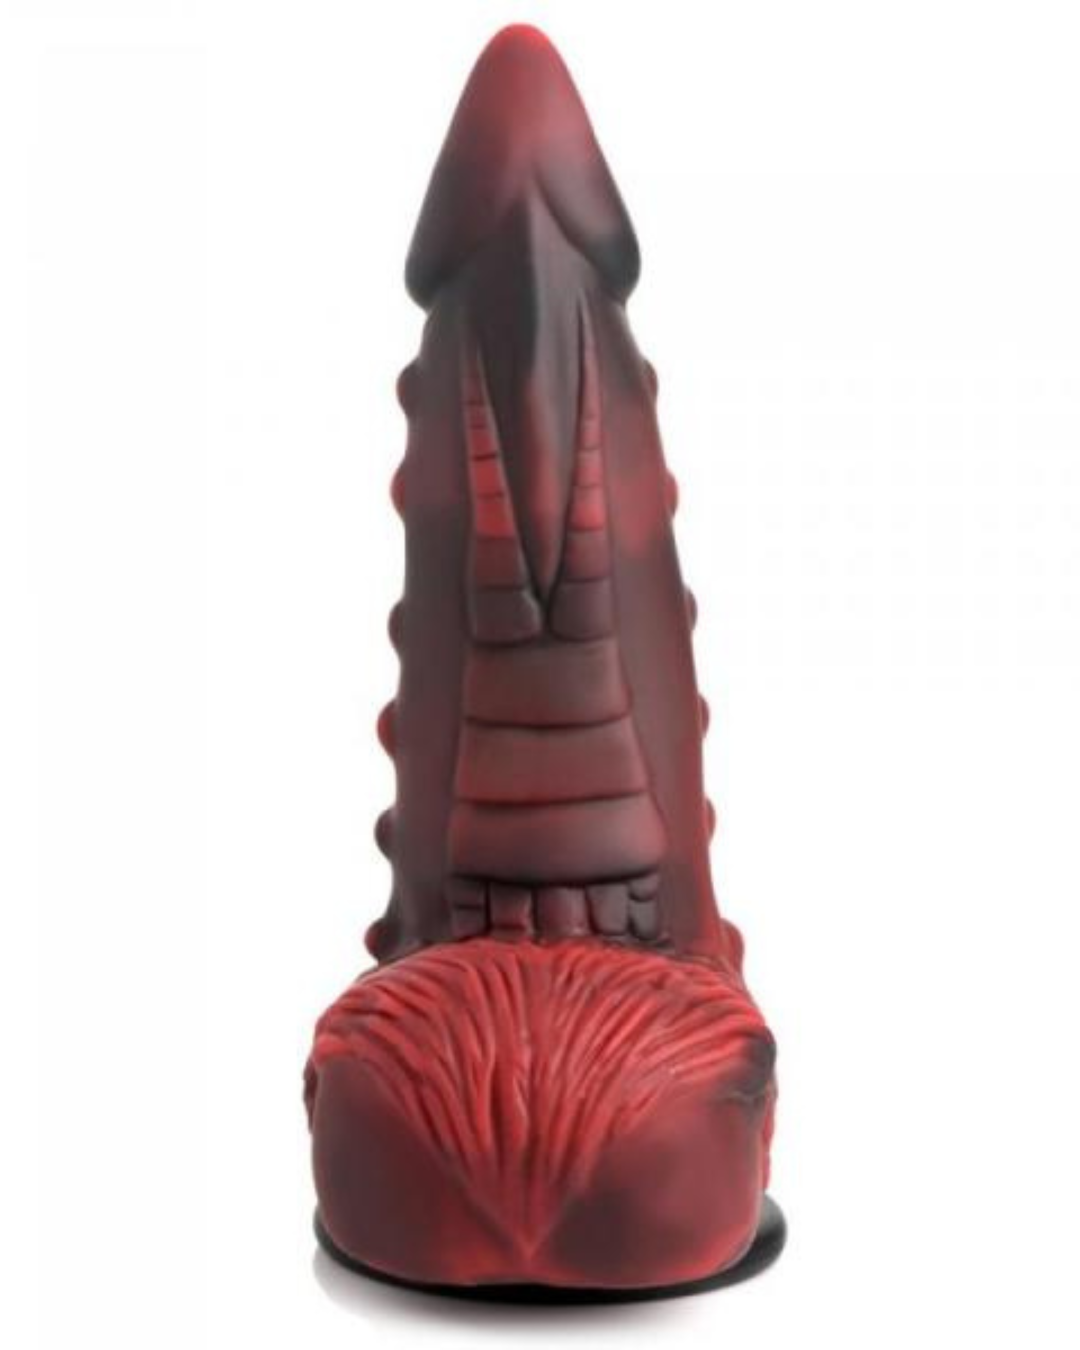 Lava Demon Thick Nubbed 8 Inch Silicone Dildo standing upright on a white background